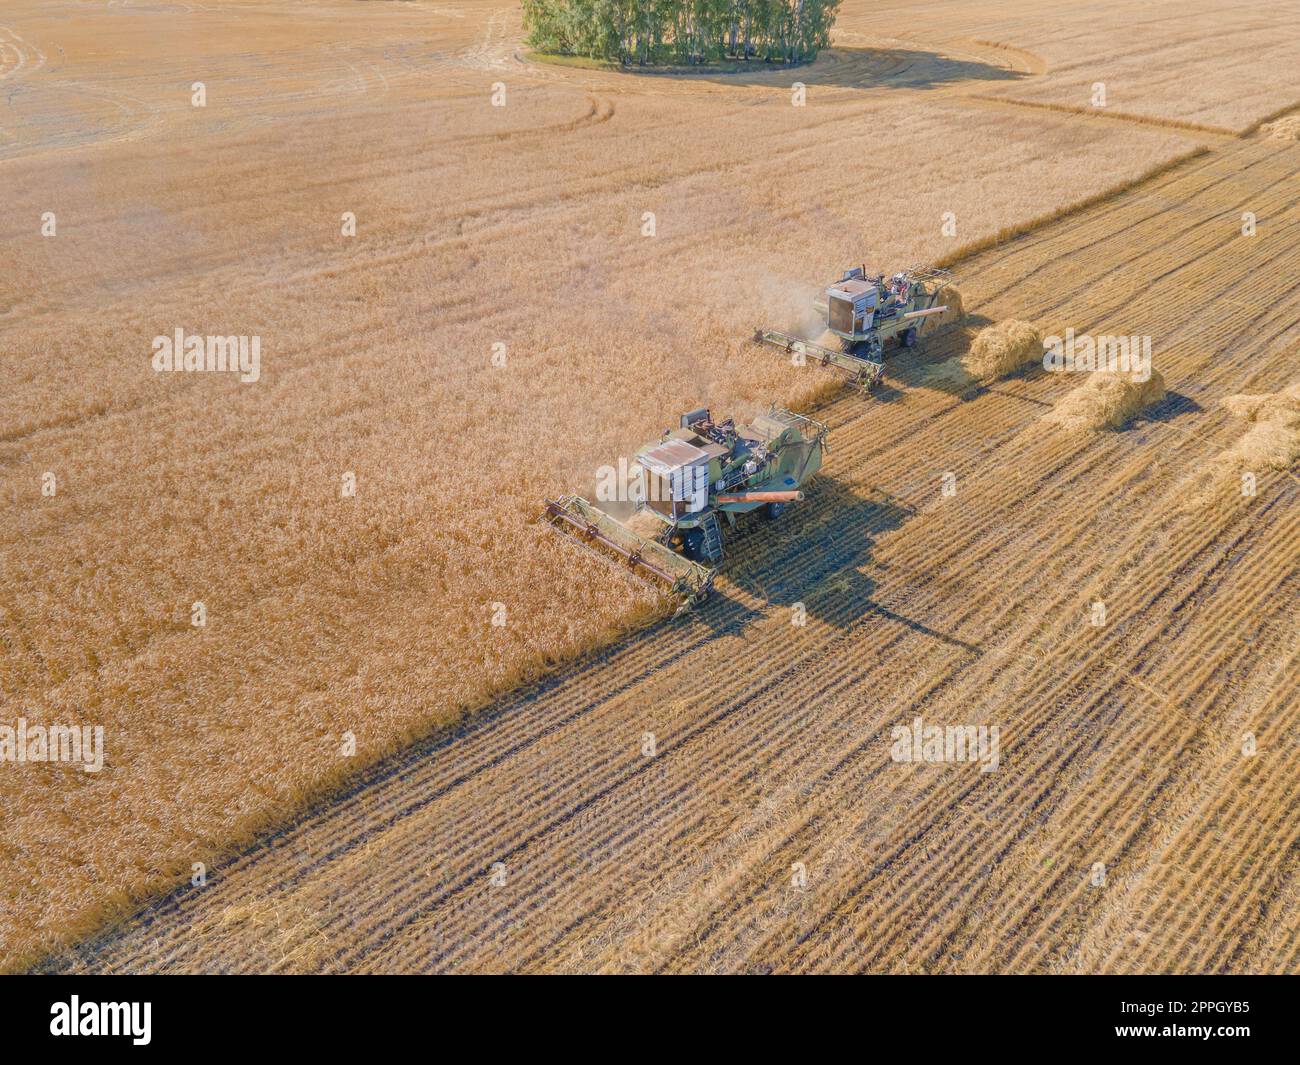 Harvest wheat grain and crop aerial view.Harvesting wheat,oats, barley in fields,ranches and farmlands.Combines mow in the field.Agro-industry.Combine Harvester Cutting on wheat filed.Machine harvest Stock Photo